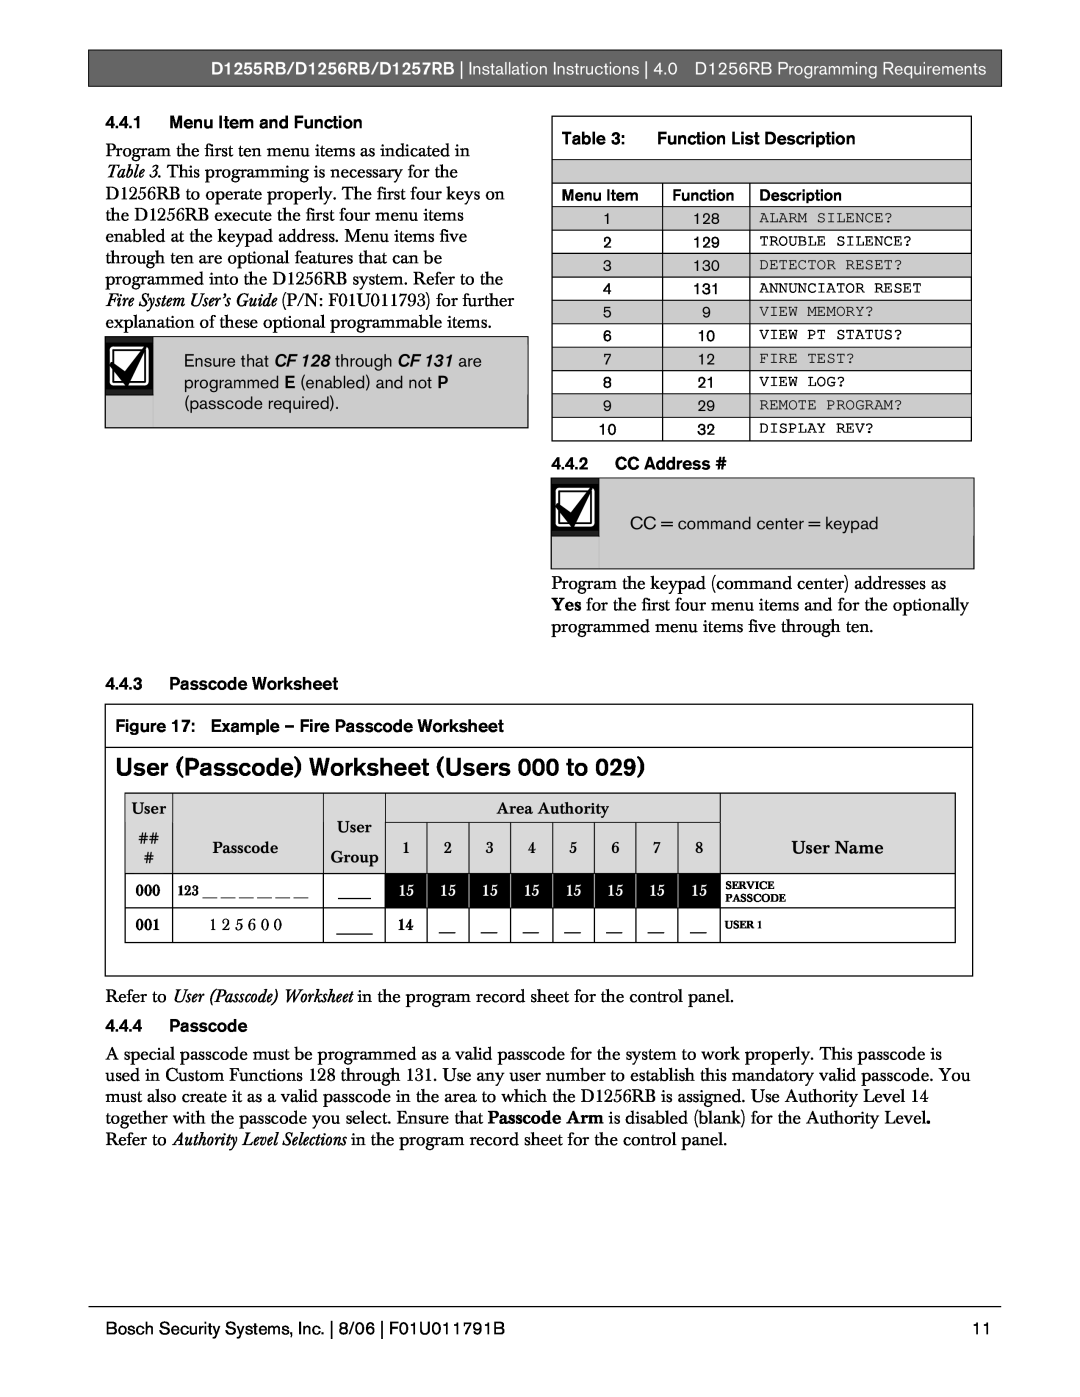 Bosch Appliances D1257RB, D1256RB, D1255RB installation instructions User Passcode Worksheet Users 000 to 